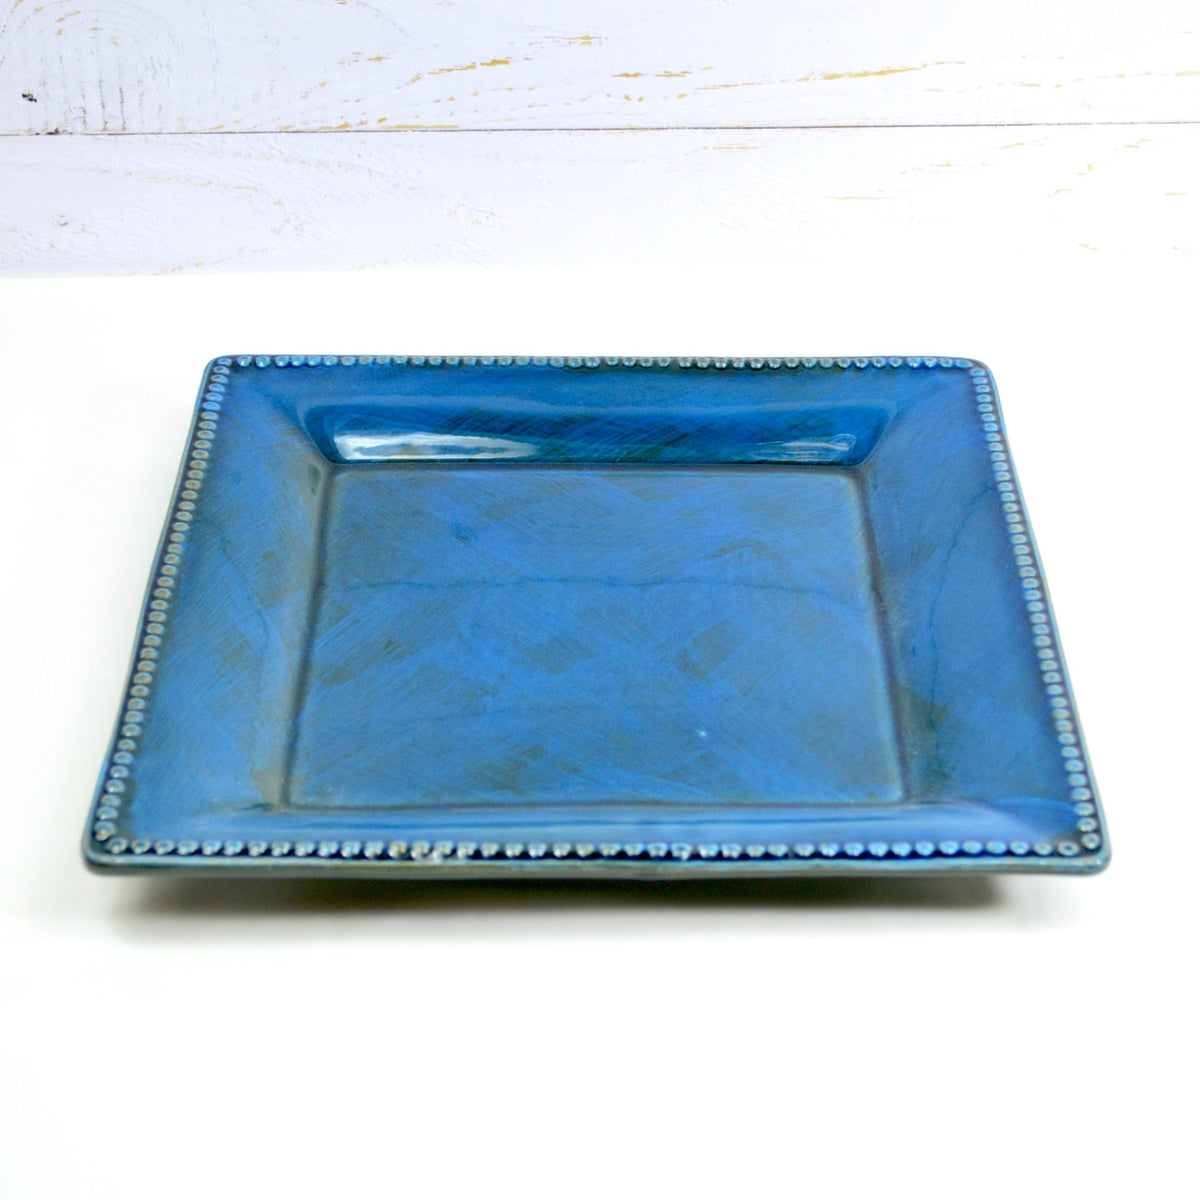 Tuscan Ceramic Large Square Platter, Made in Italy - My Italian Decor